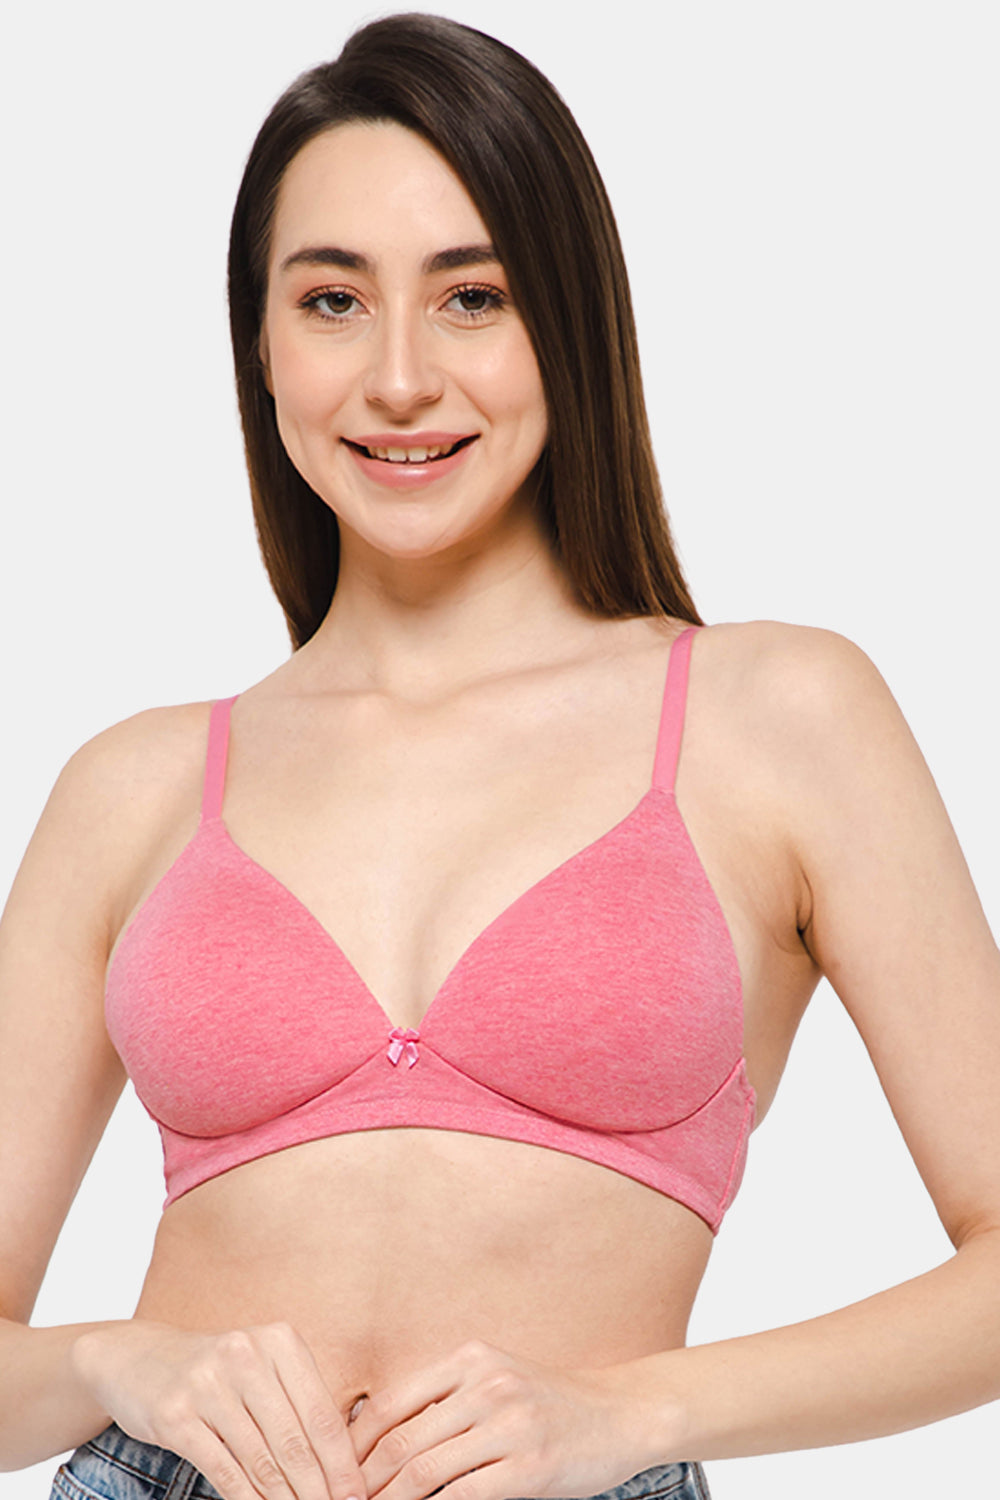 Buy XEMIT Cleavage Cover for Women